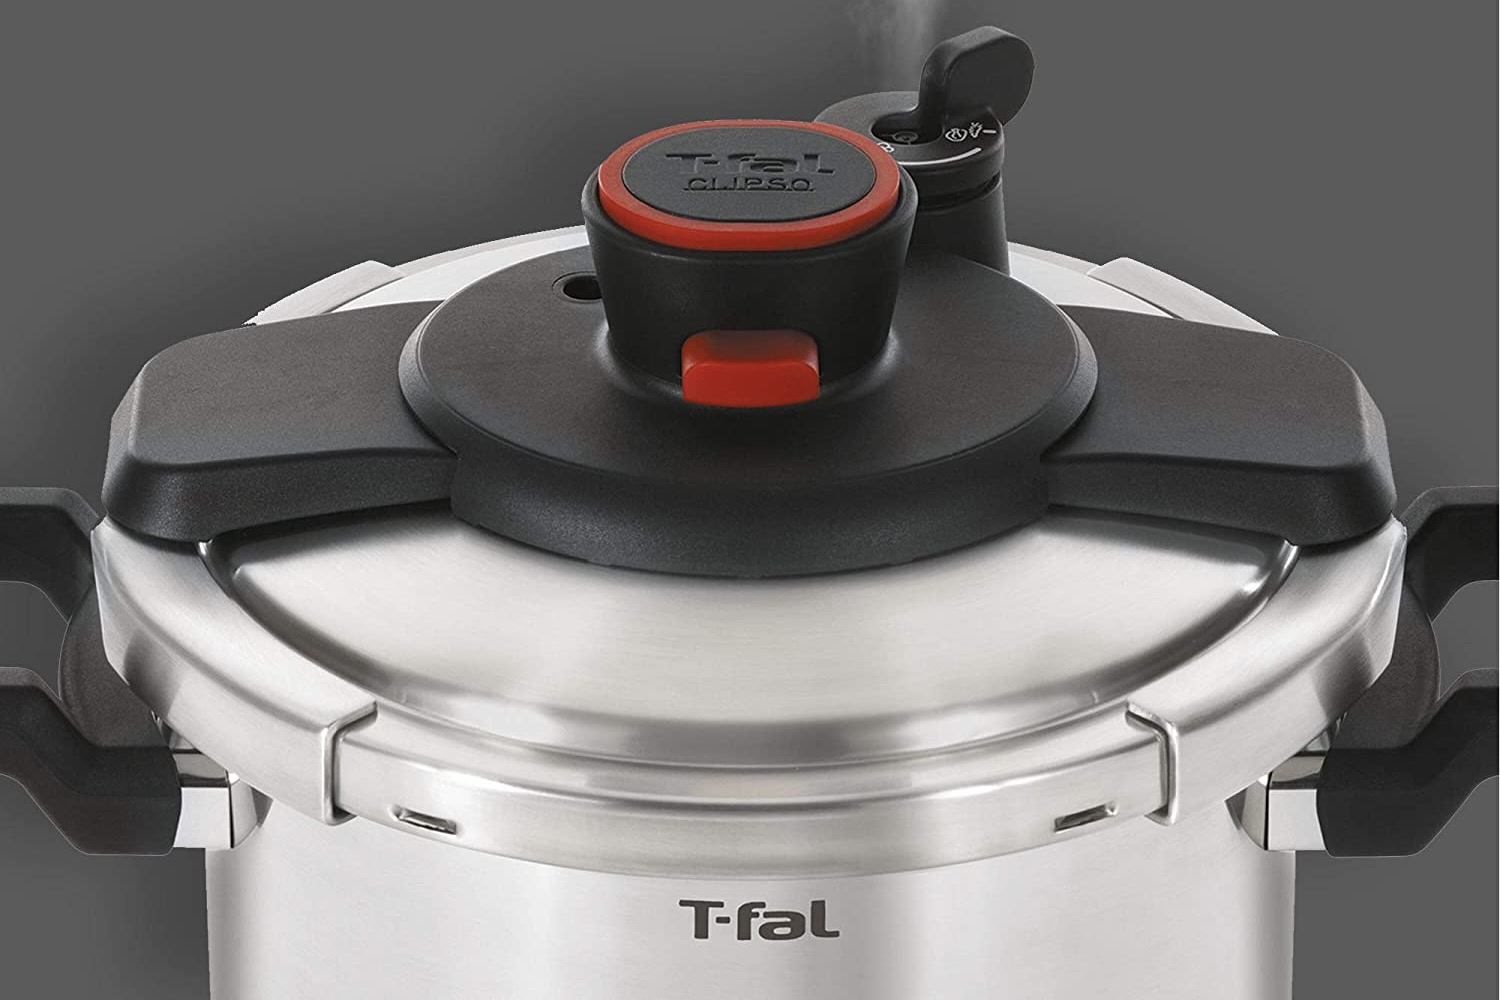 The 5 best pressure cookers of 2022